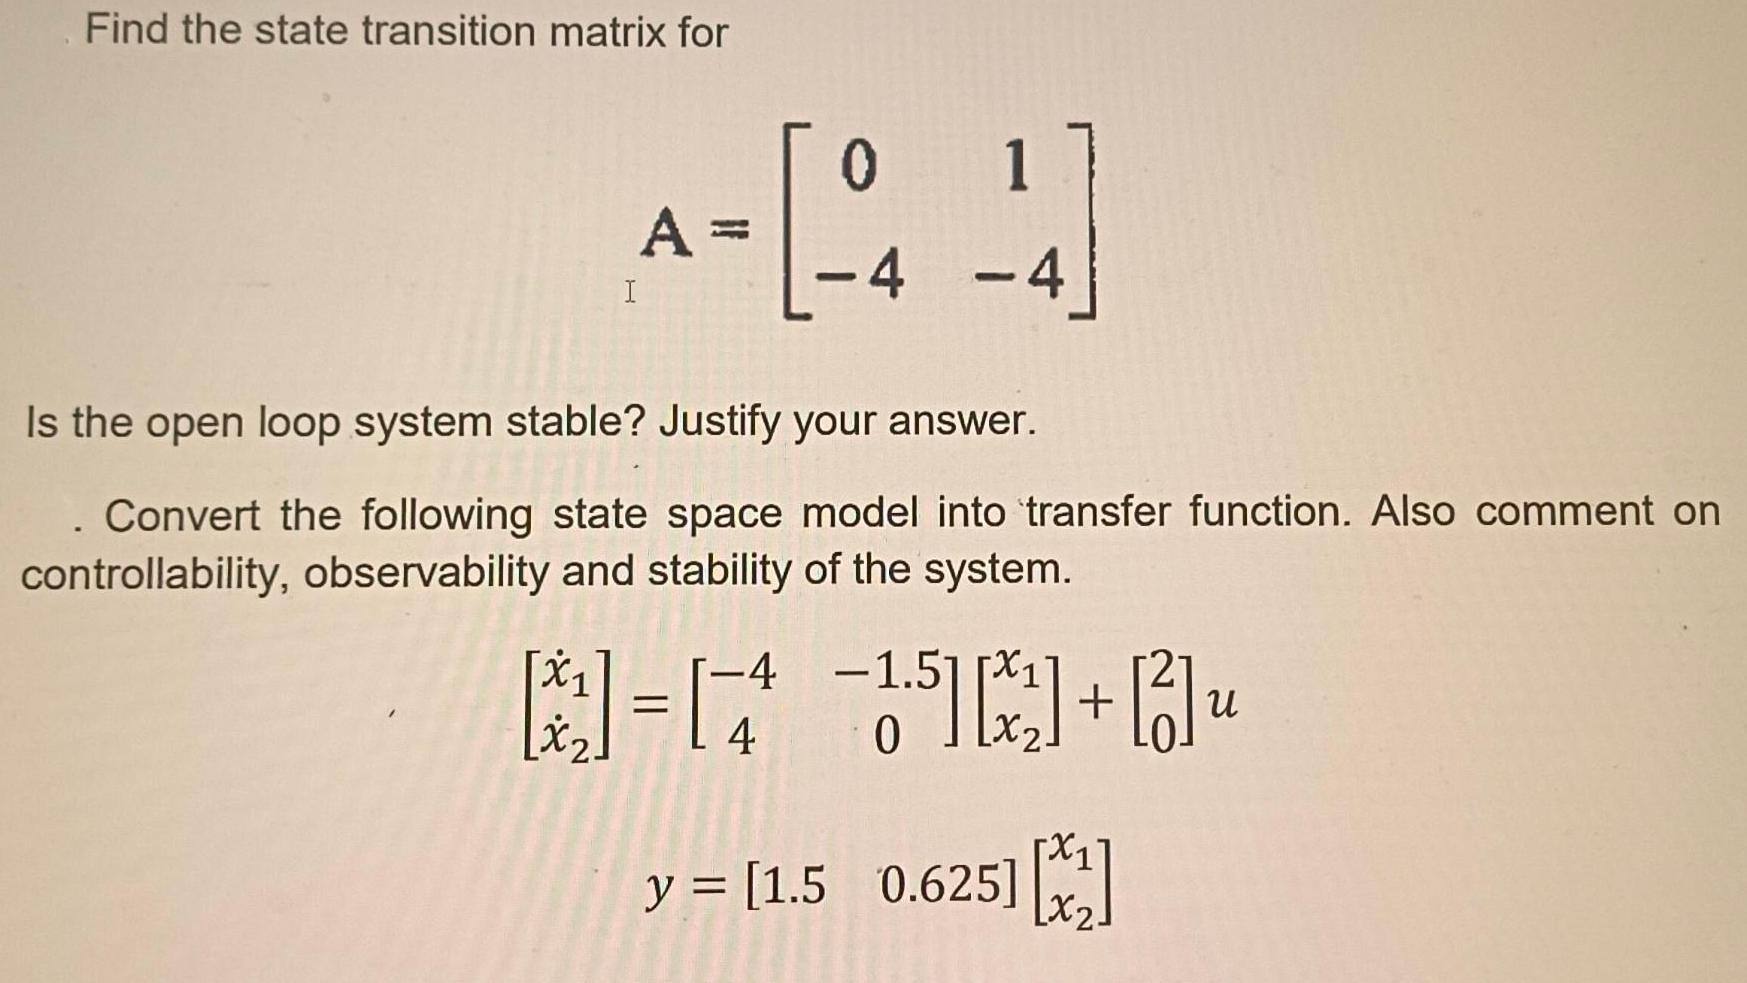 Find the state transition matrix for A I H [-14 01 [*] = [4 -4 -4 Is the open loop system stable? Justify